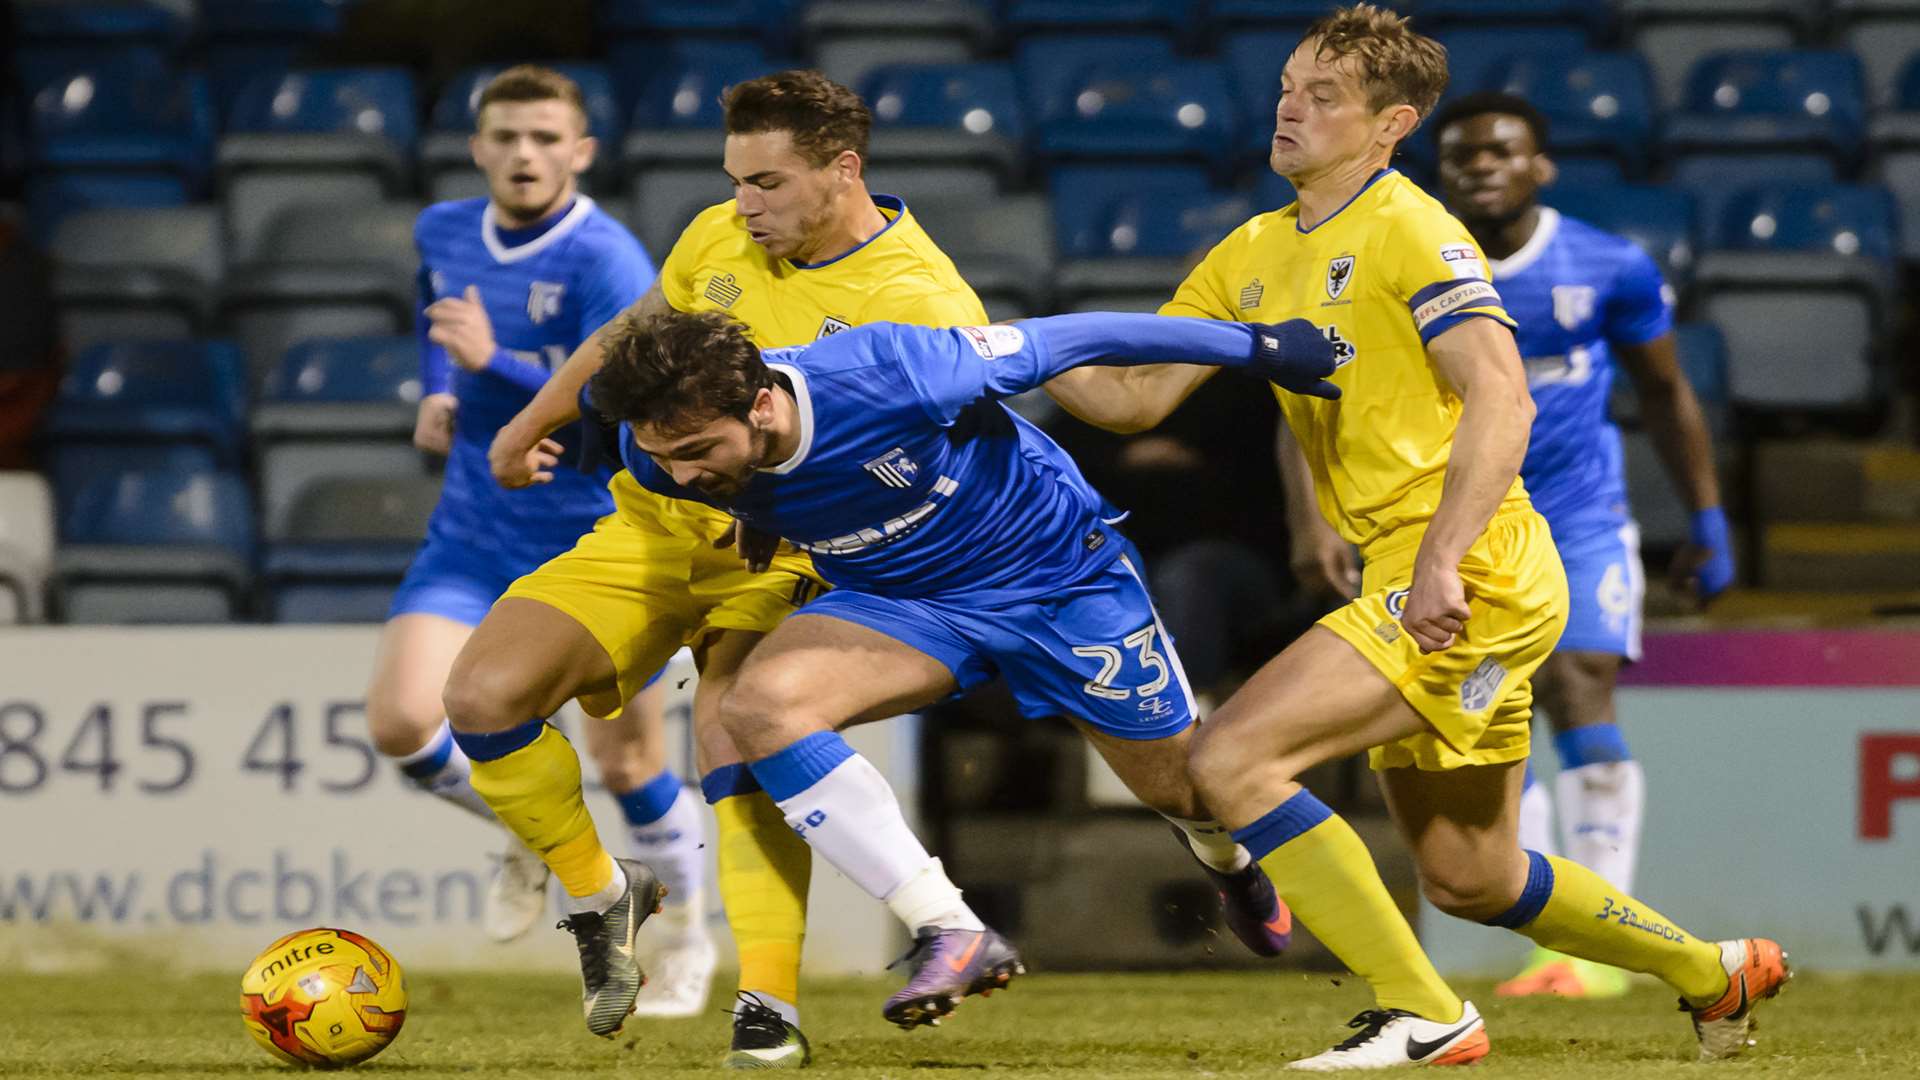 Bradley Dack forces his way past the Dons defence Picture: Andy Payton